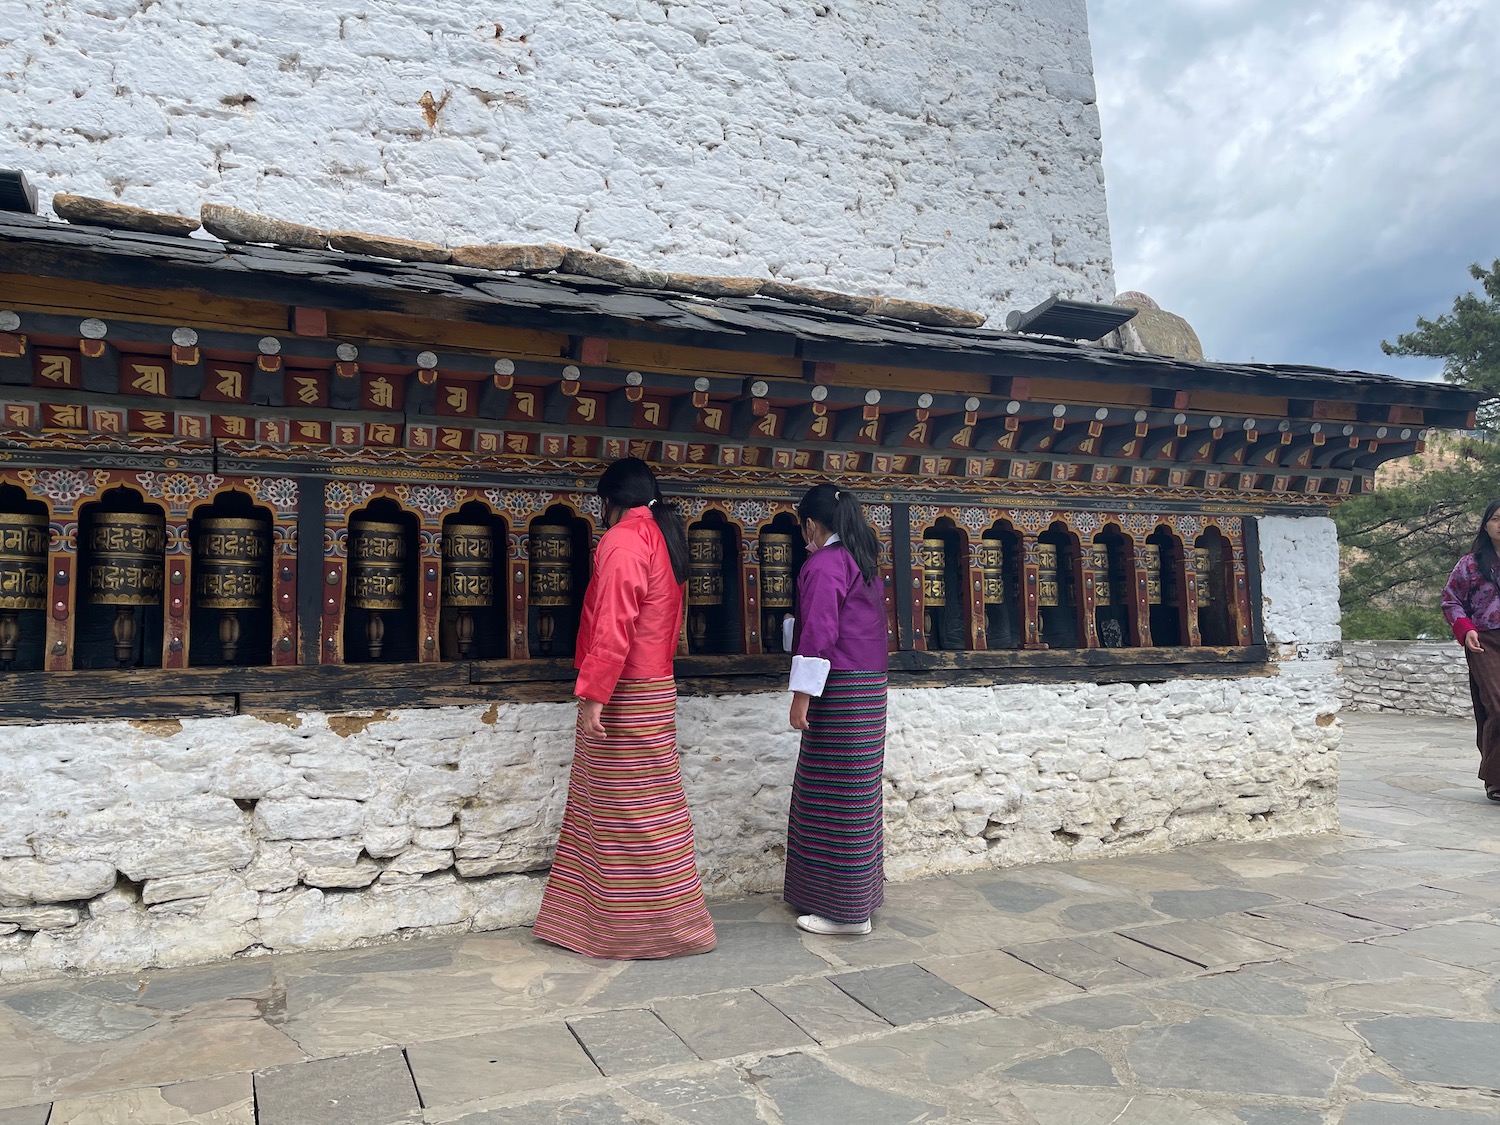 two women in traditional clothing standing in front of a building